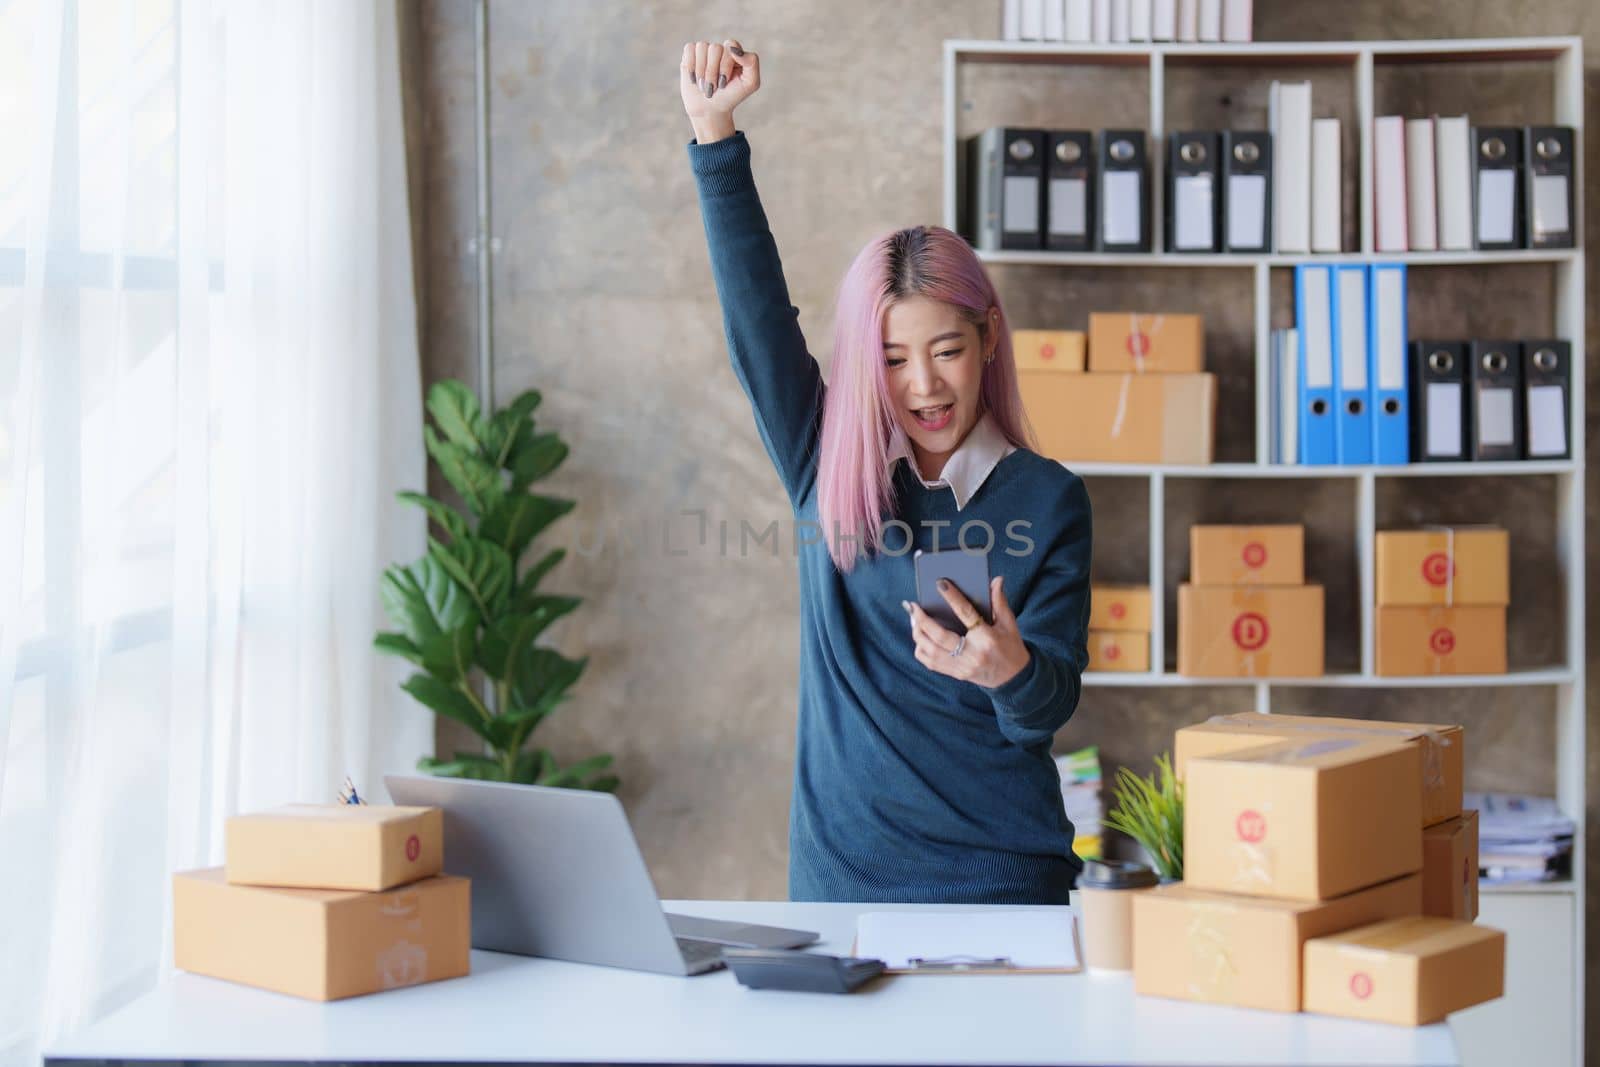 Startup small business entrepreneur of freelance Asian woman using a laptop with box Cheerful success online marketing packaging box and delivery SME idea concept by itchaznong